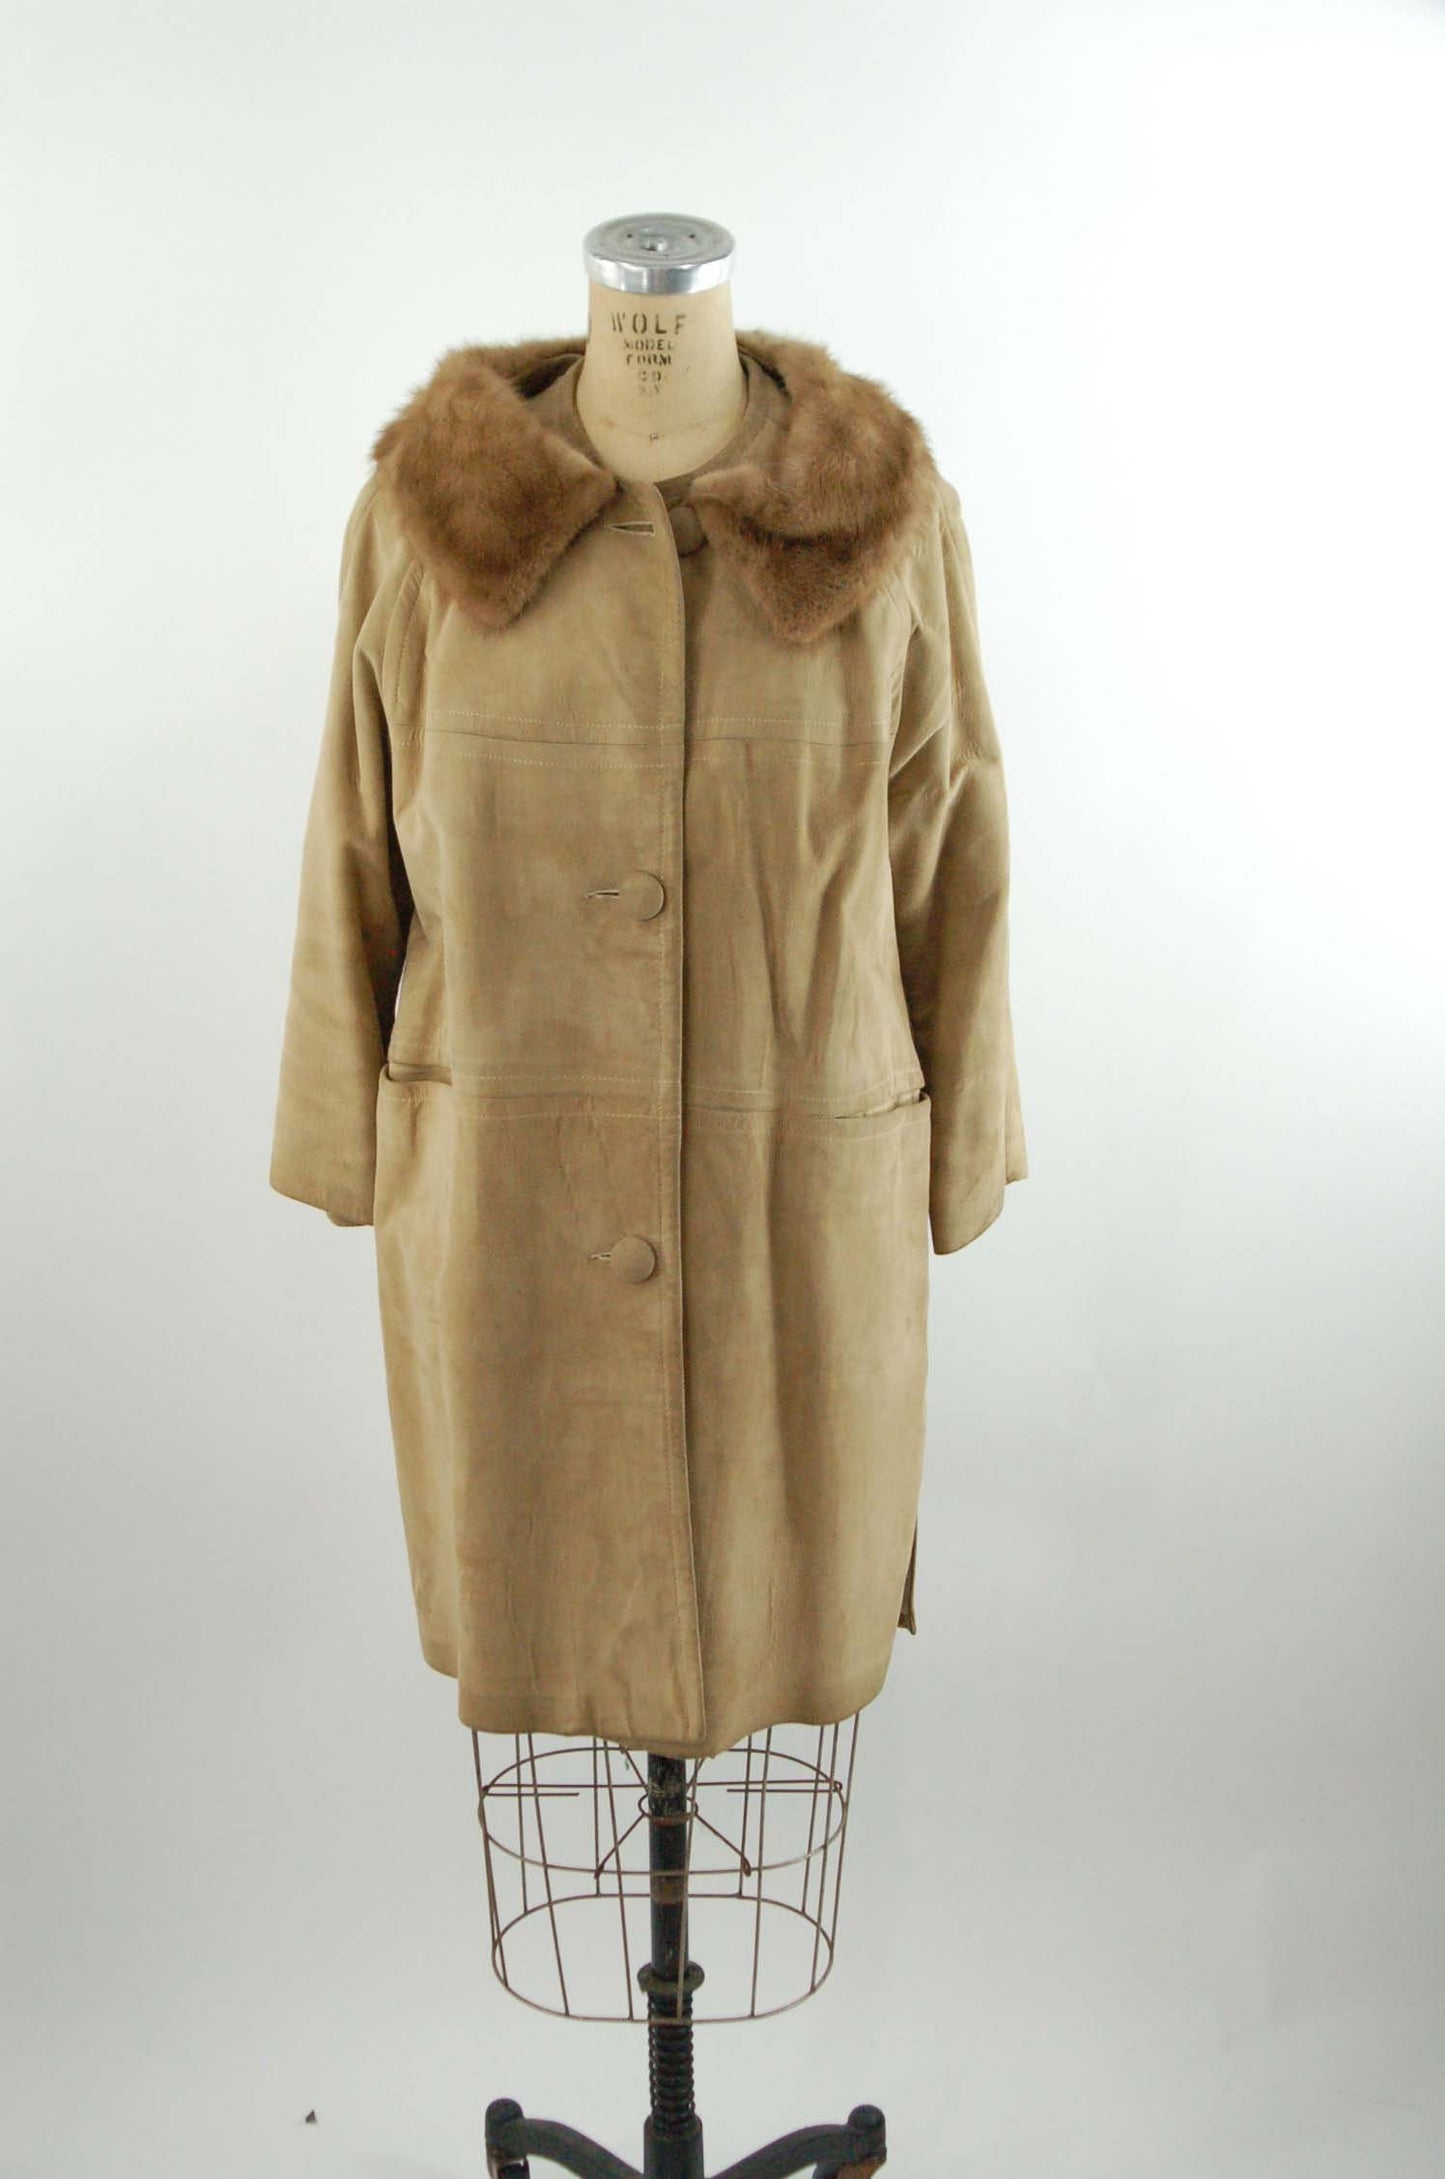 1960s suede coat with mink collar knee length soft leather coat Size M/L